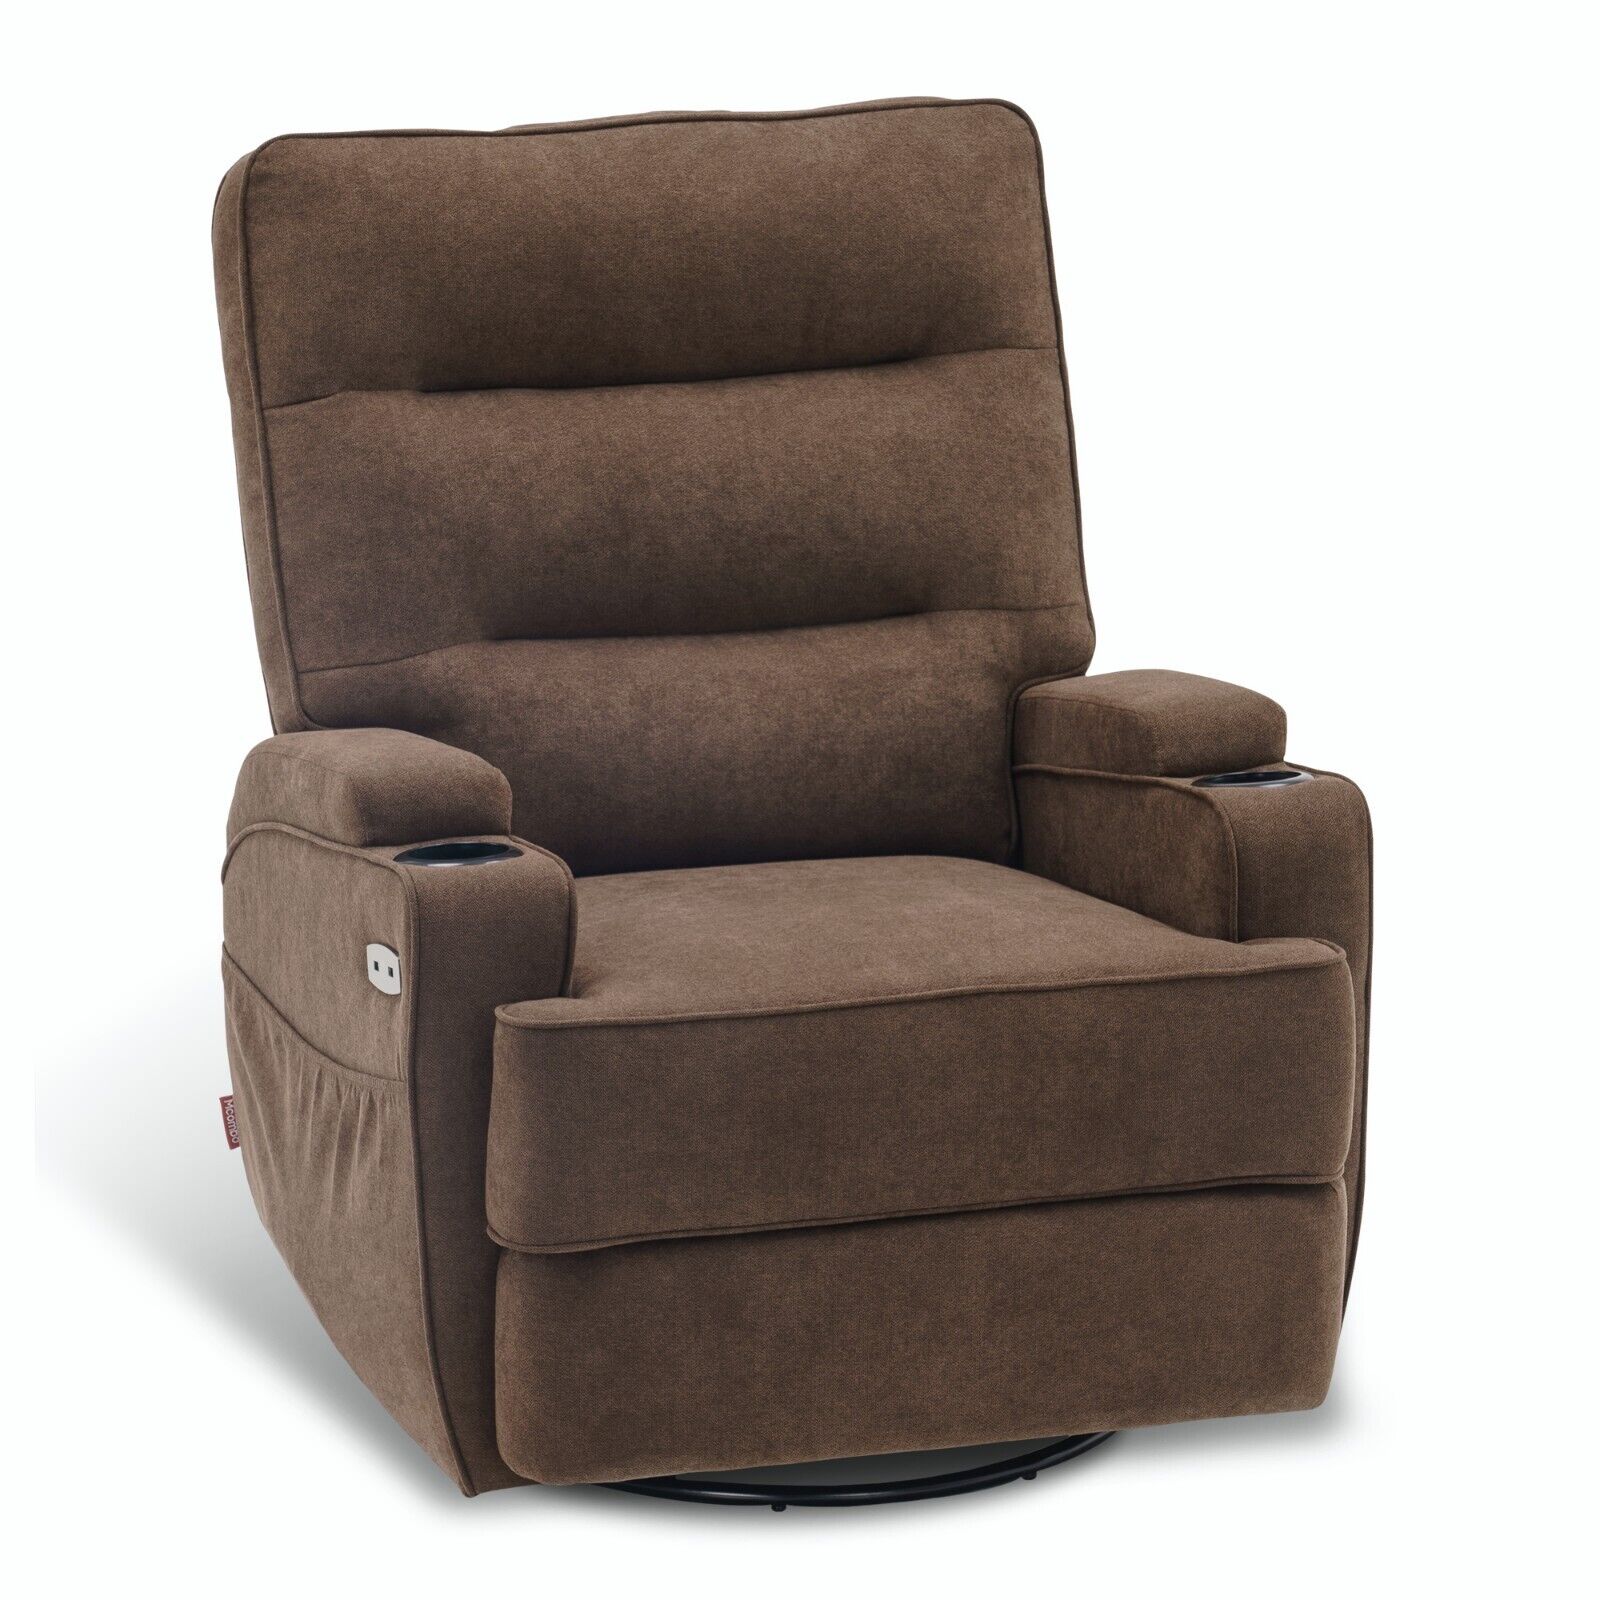 Mcombo Electric Power Swivel Glider Recliner Chair with Heat and Vibrating 7752